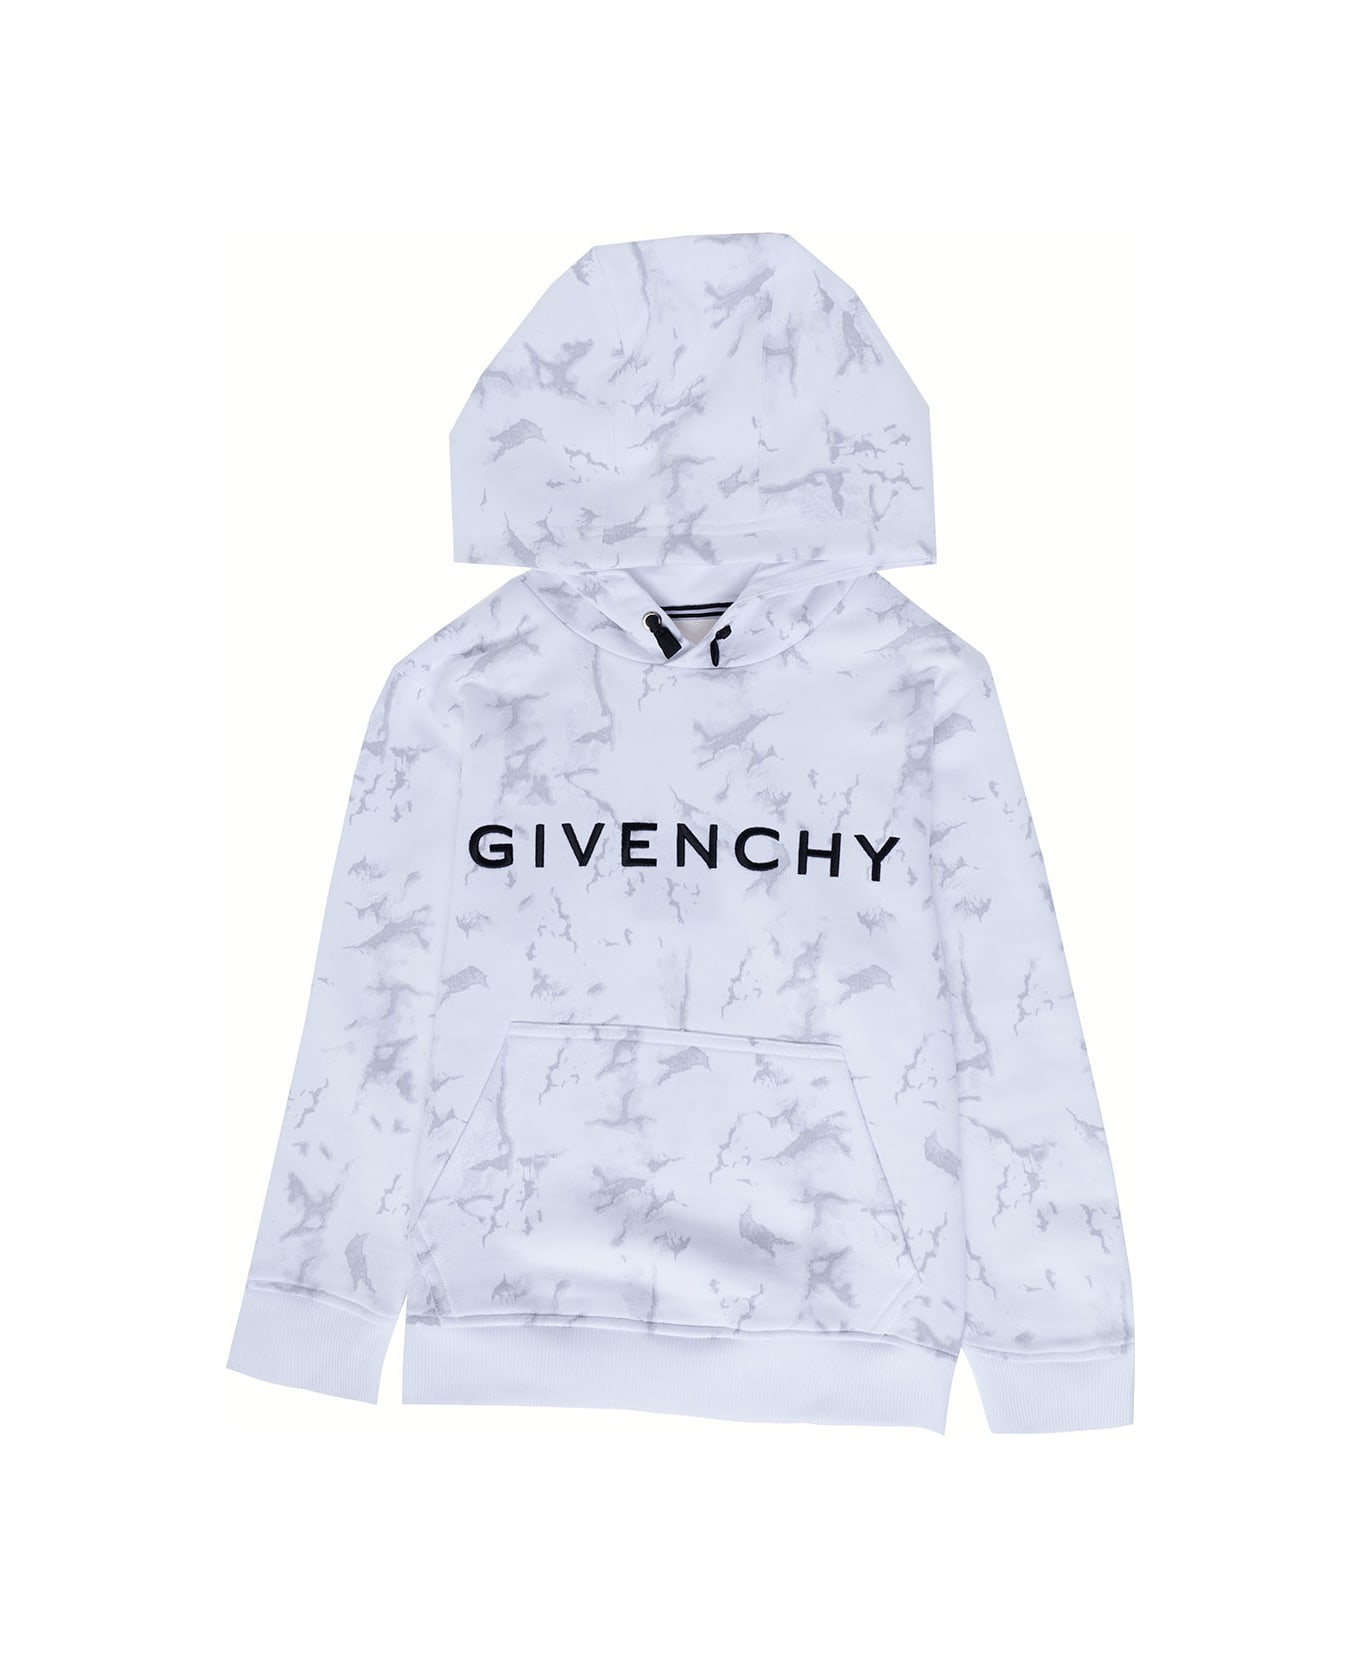 Givenchy Boy Cotton White Hoodie With Allover Print And Logo - White